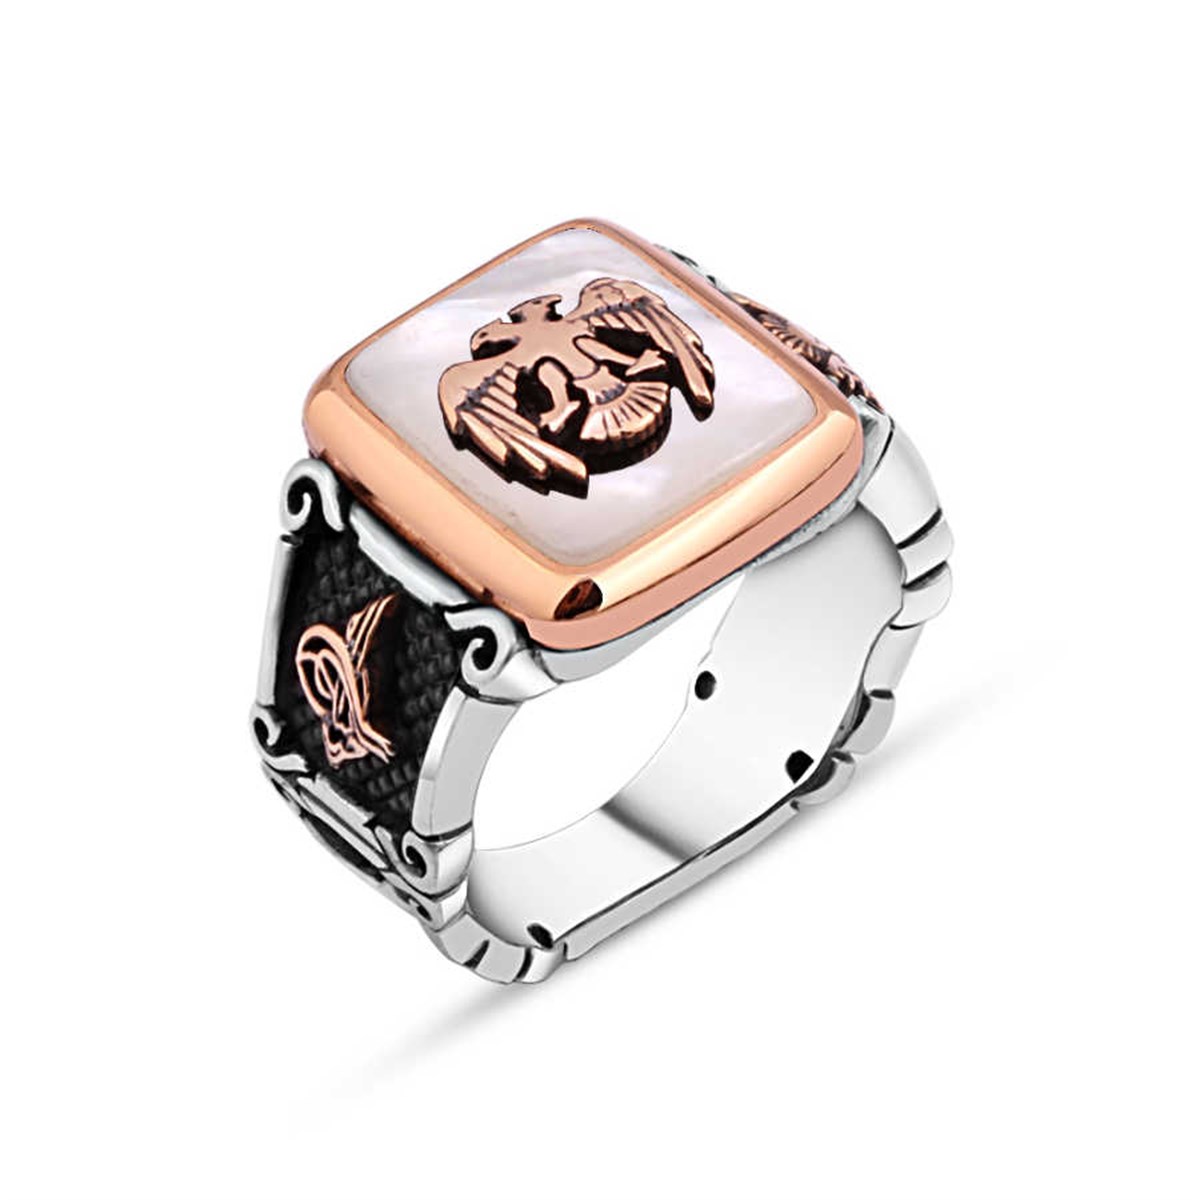 Double Headed Eagle Silver Men's Ring on Mother of Pearl Stone